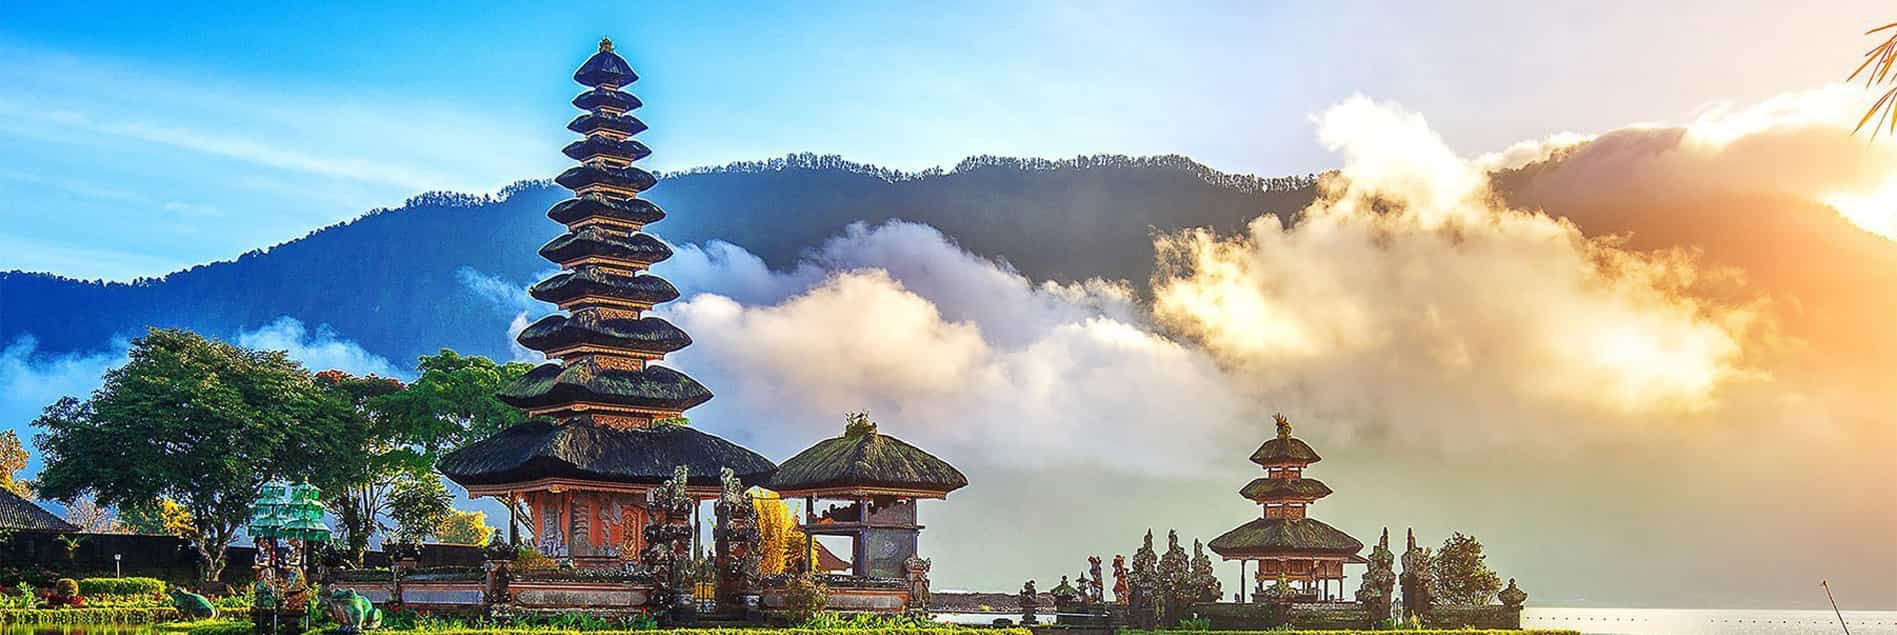 Bali Honeymoon Packages from India, Book Bali Tour Packages